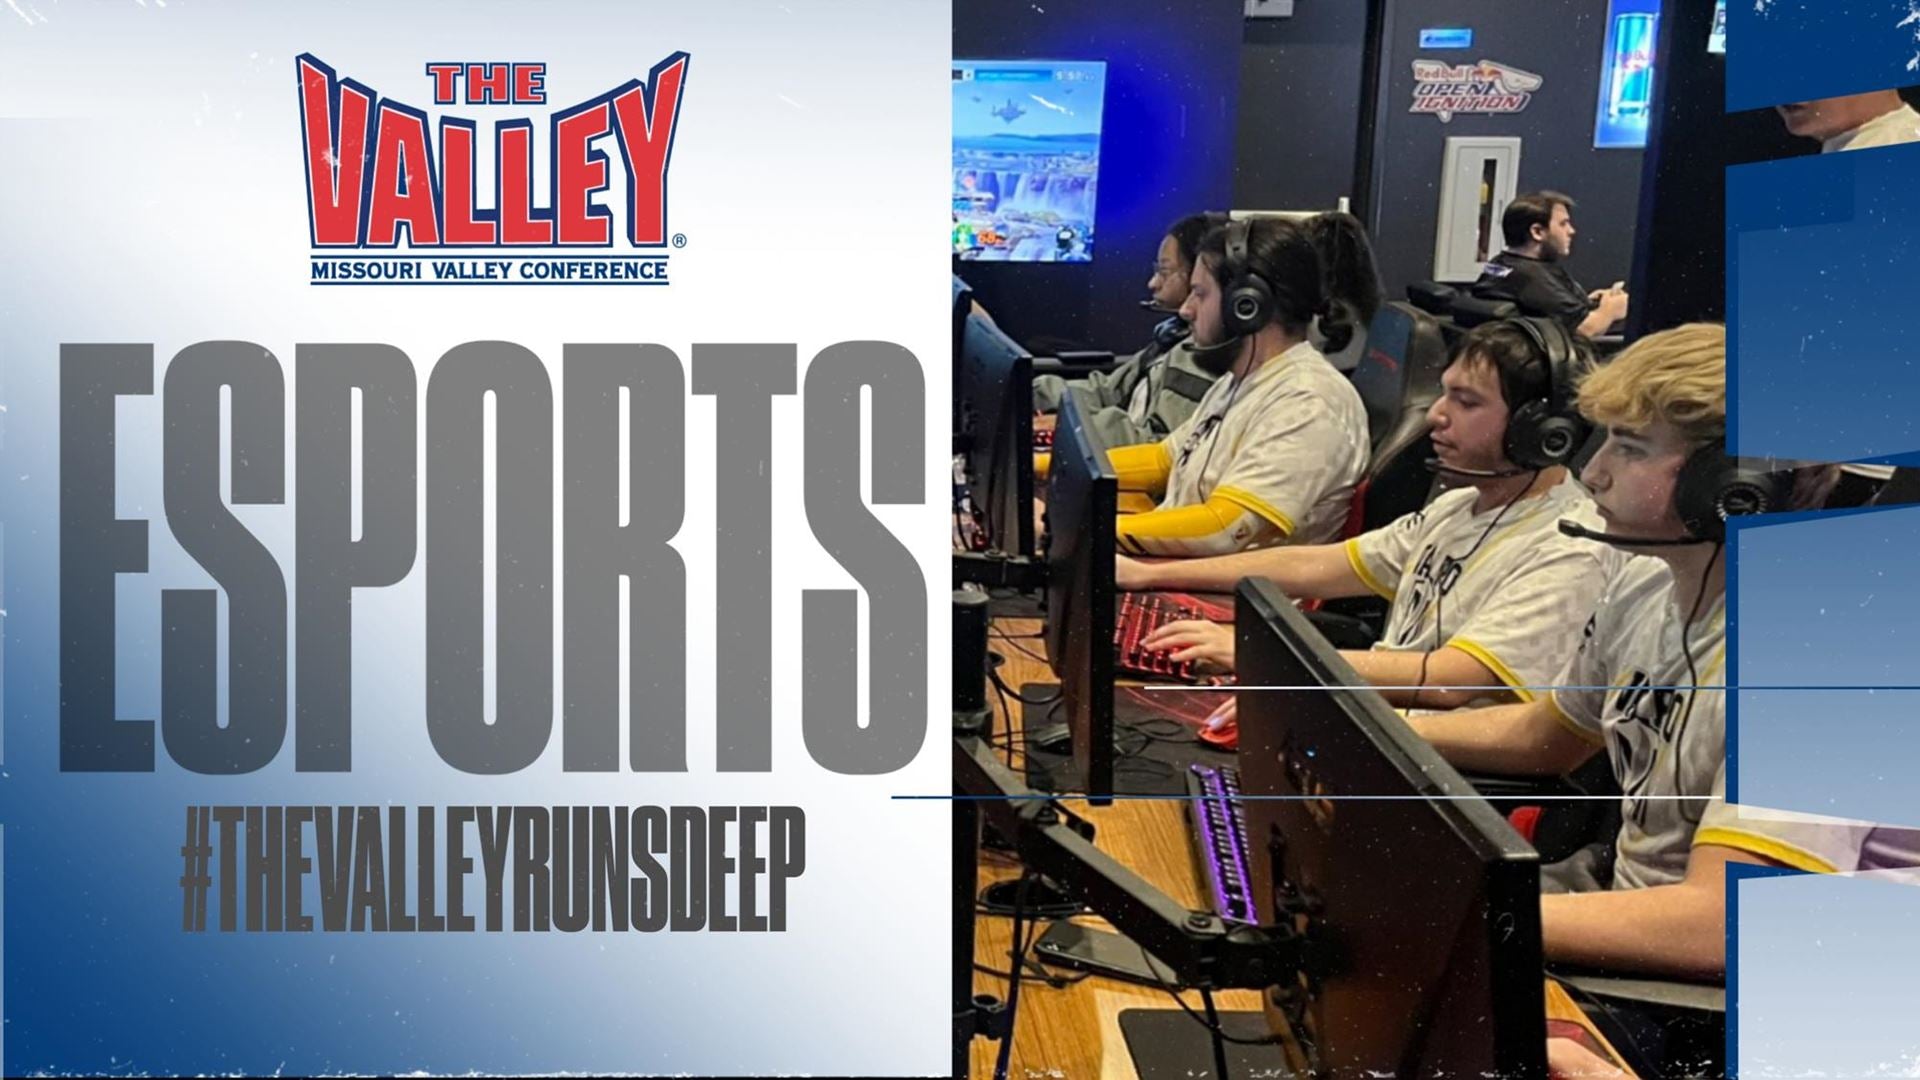 NECC to Support the Missouri Valley Conference as they Announce the Addition of Esports